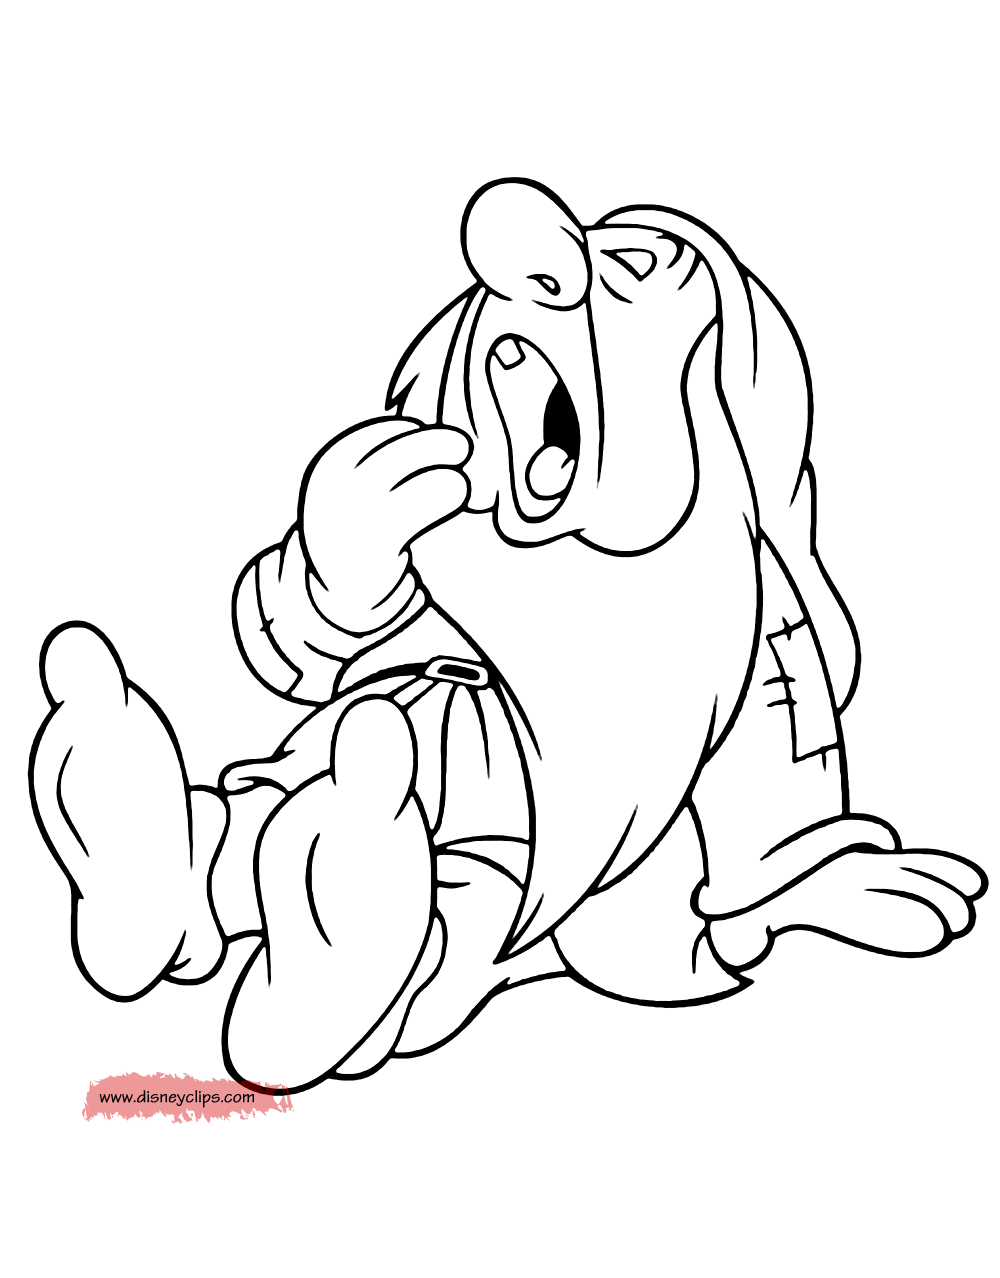 Download Snow White and the Seven Dwarfs Coloring Pages 3 | Disney ...